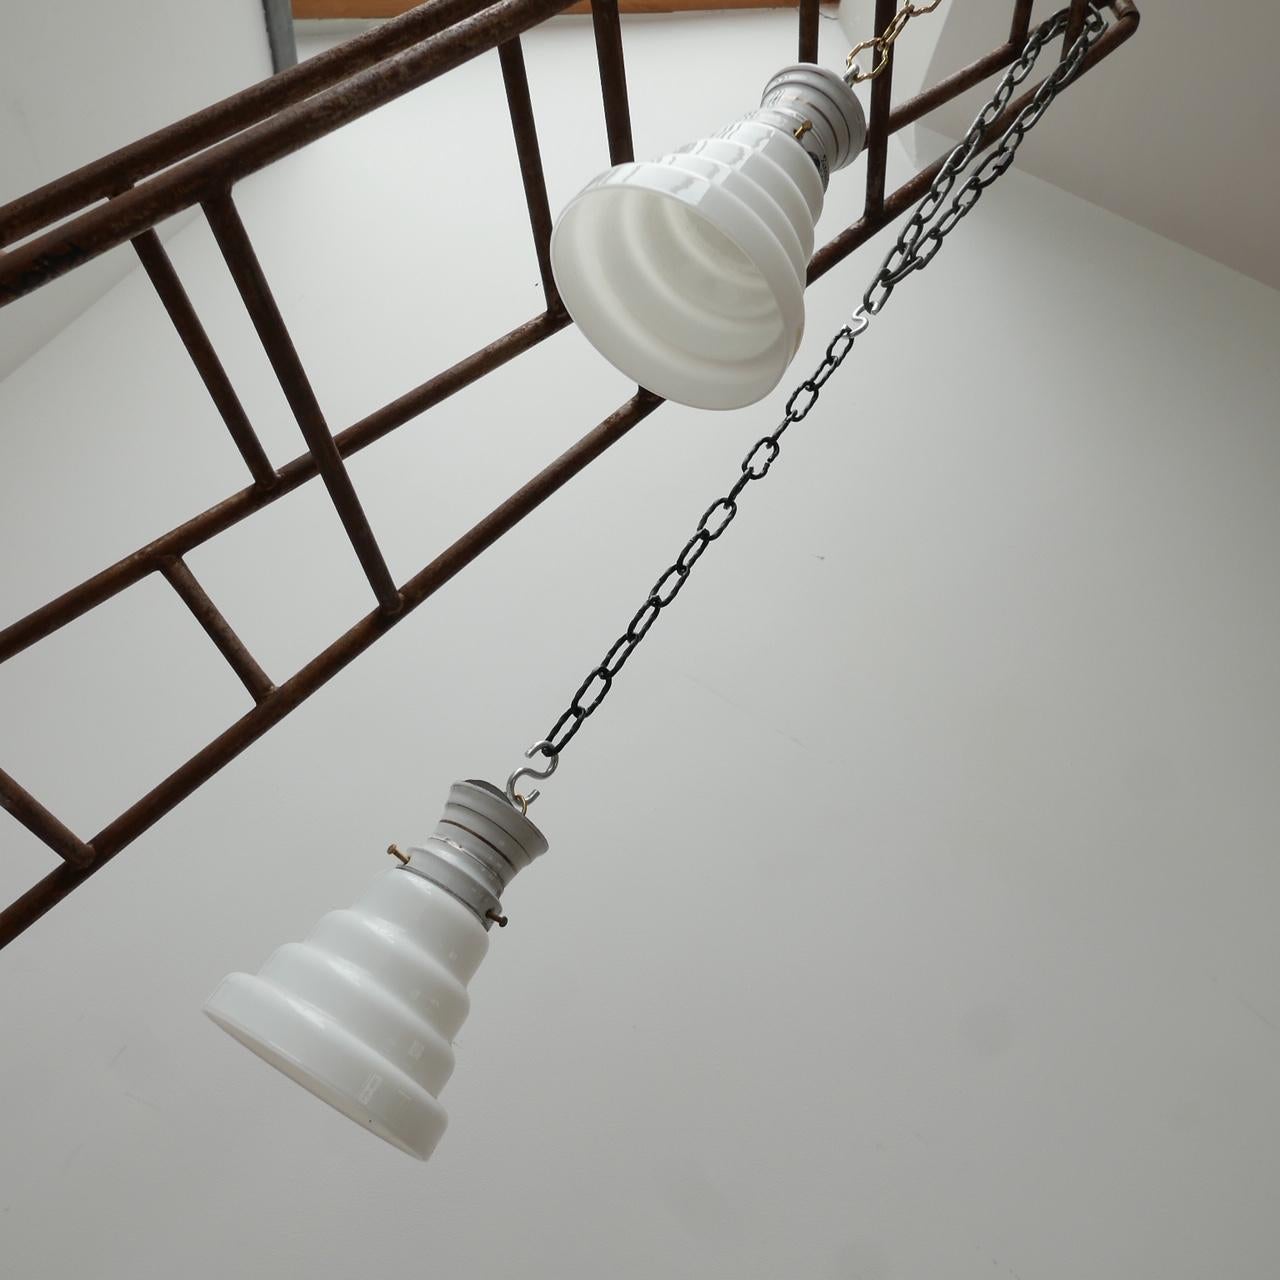 Antique stepped opaline glass pendant lights. 

Sold individually. 

Enamel galleries, opaline glass with open base. 

Germany, c1930s. 

Re-wired and PAT tested. 

Priced and sold individually.

Dimensions: 20 height x 14 diameter in